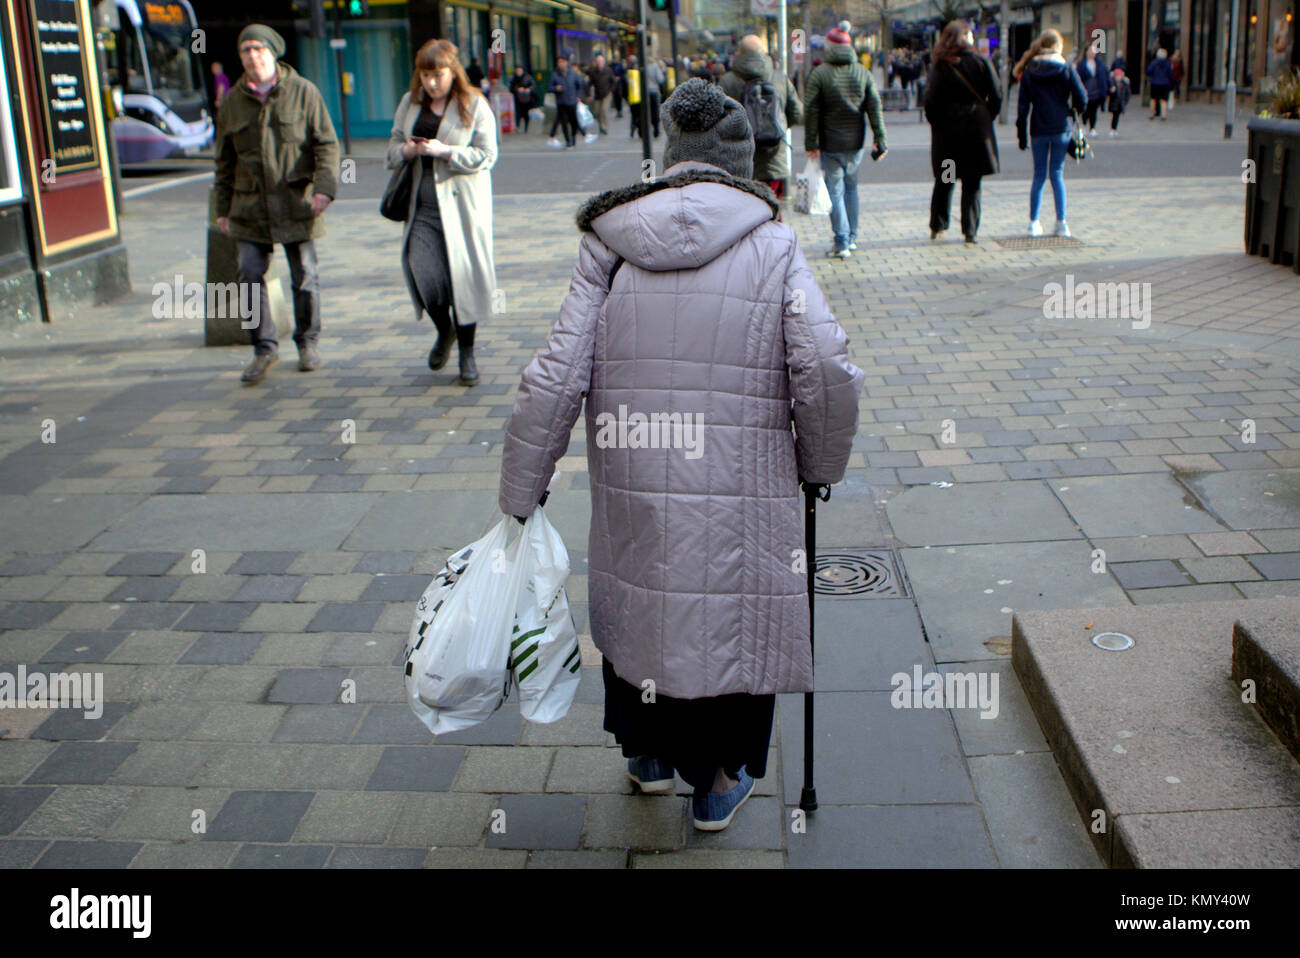 old lady senior citizen struggling with walking stick and shopping bags viewed from behind on sauchiehall street pedestrian precinct glasgow Stock Photo